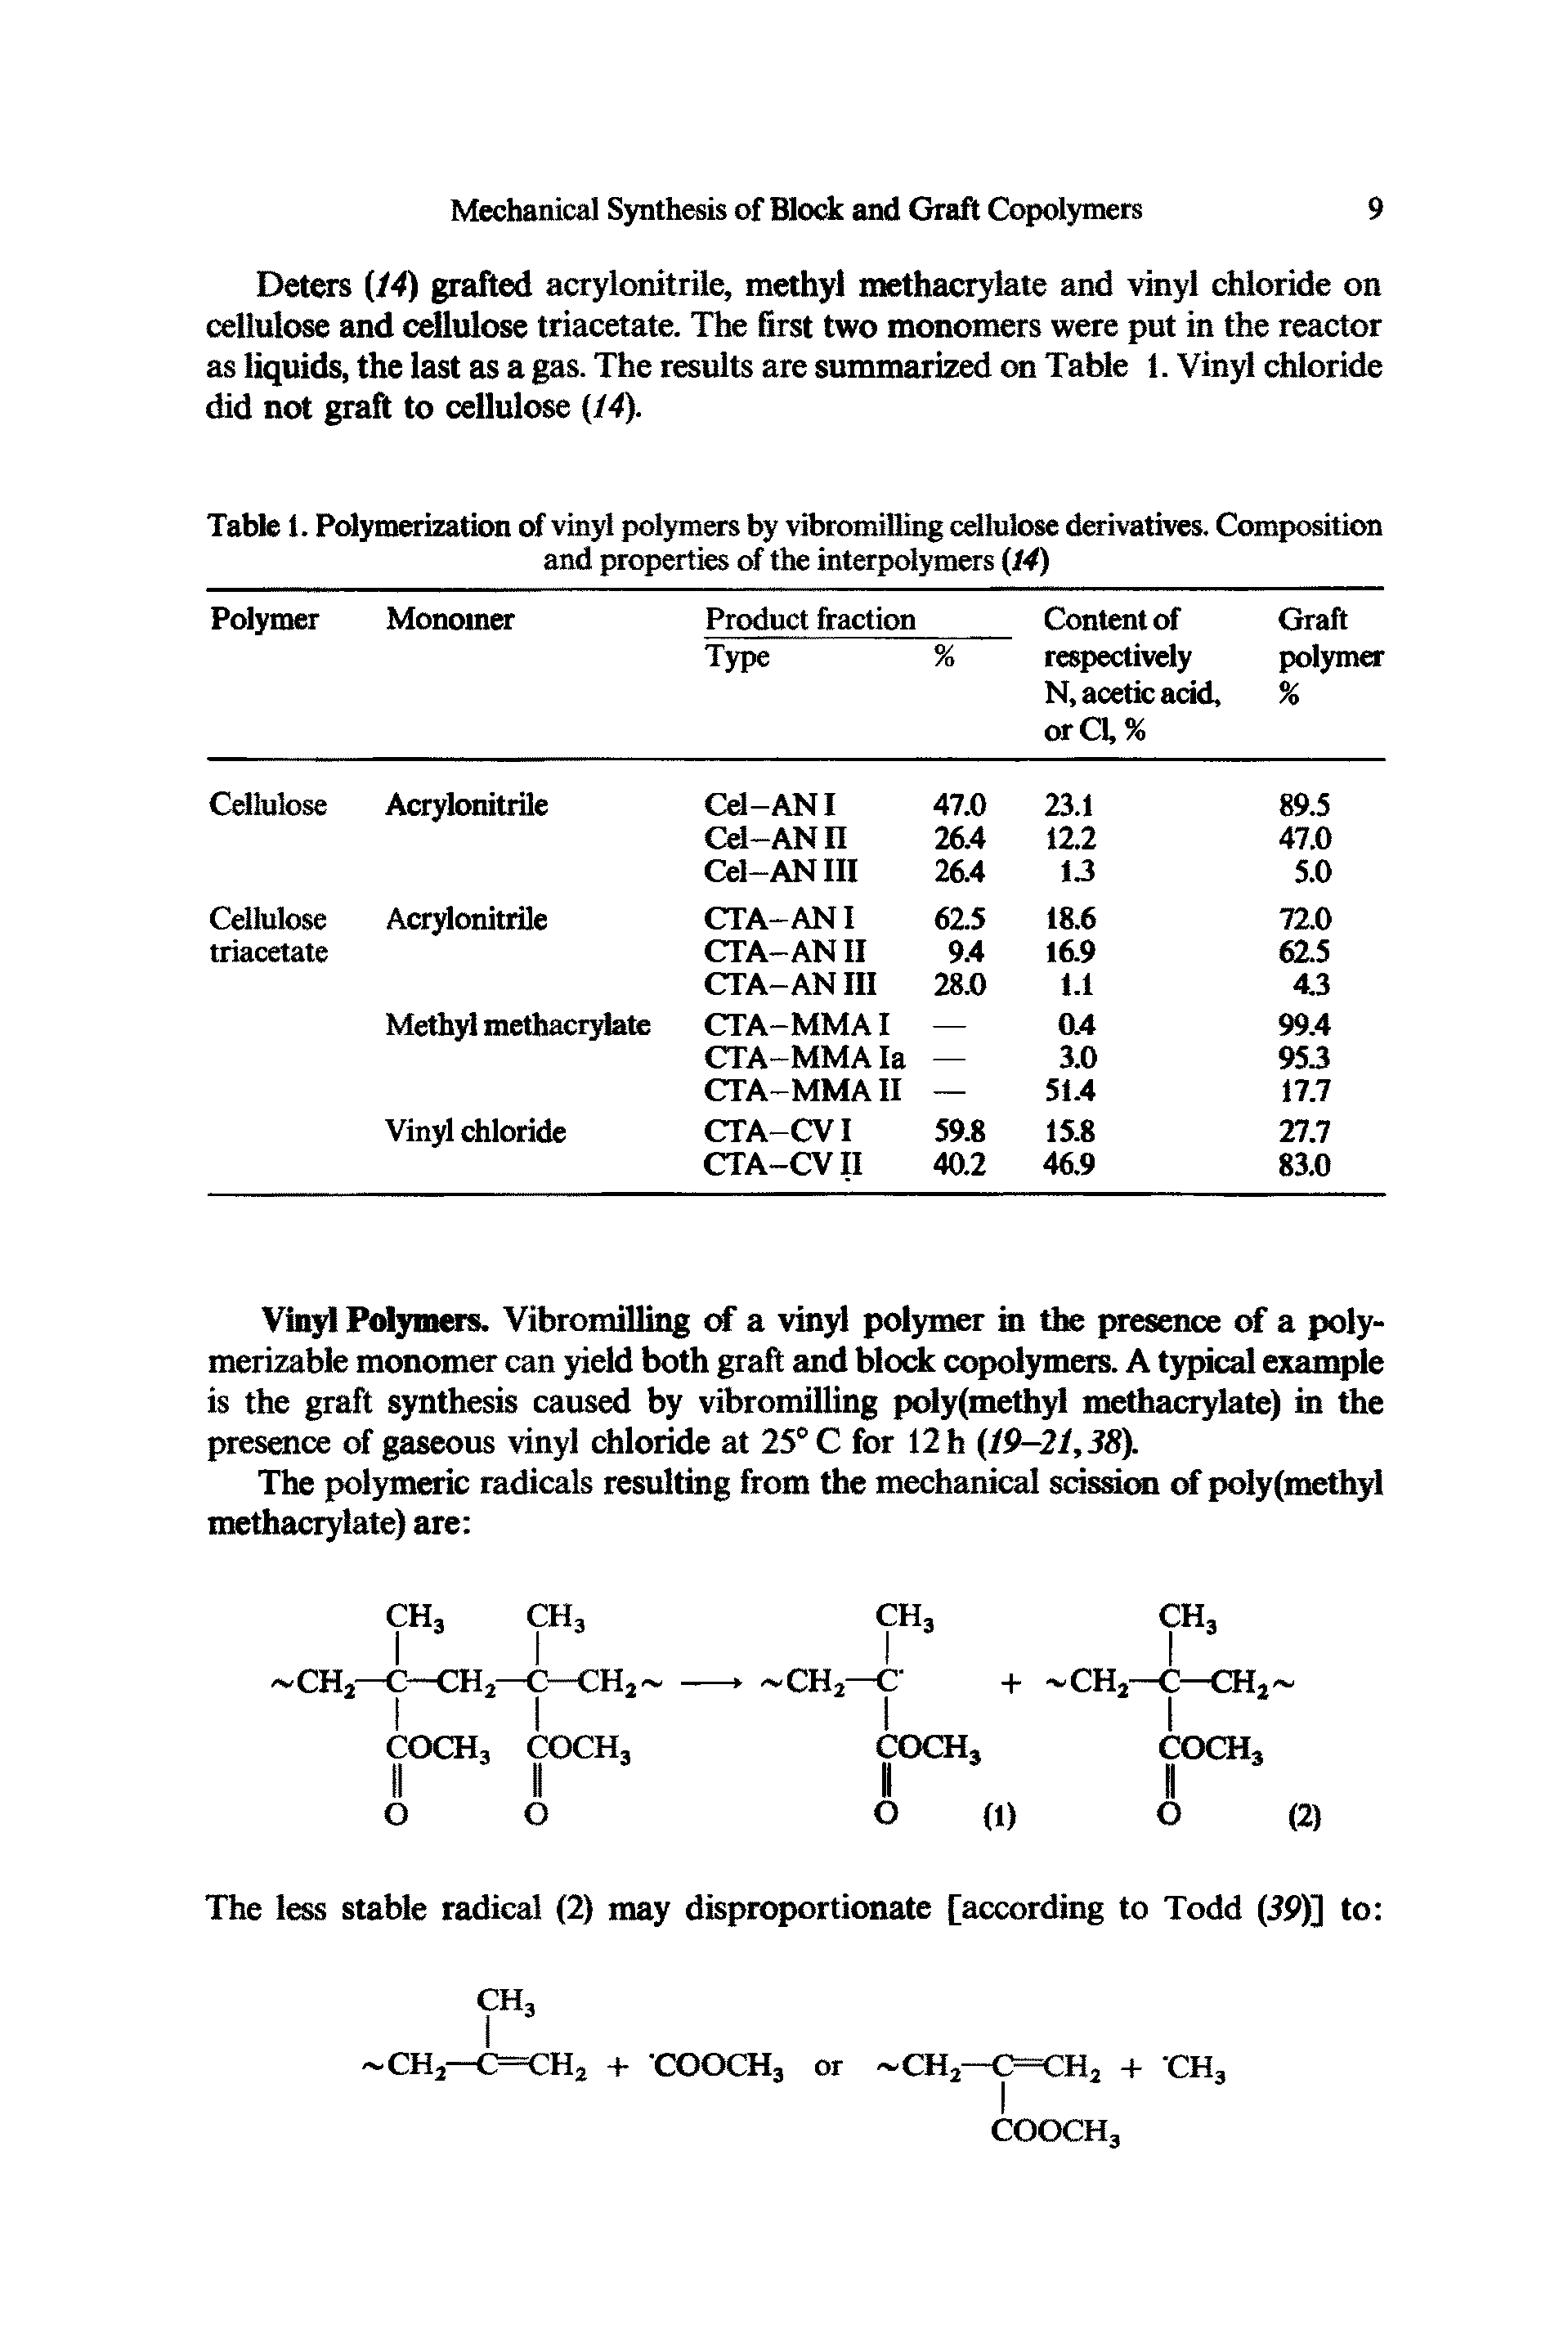 Table 1. Polymerization of vinyl polymers by vibromilling cellulose derivatives. Composition and properties of the interpolymers (14)...